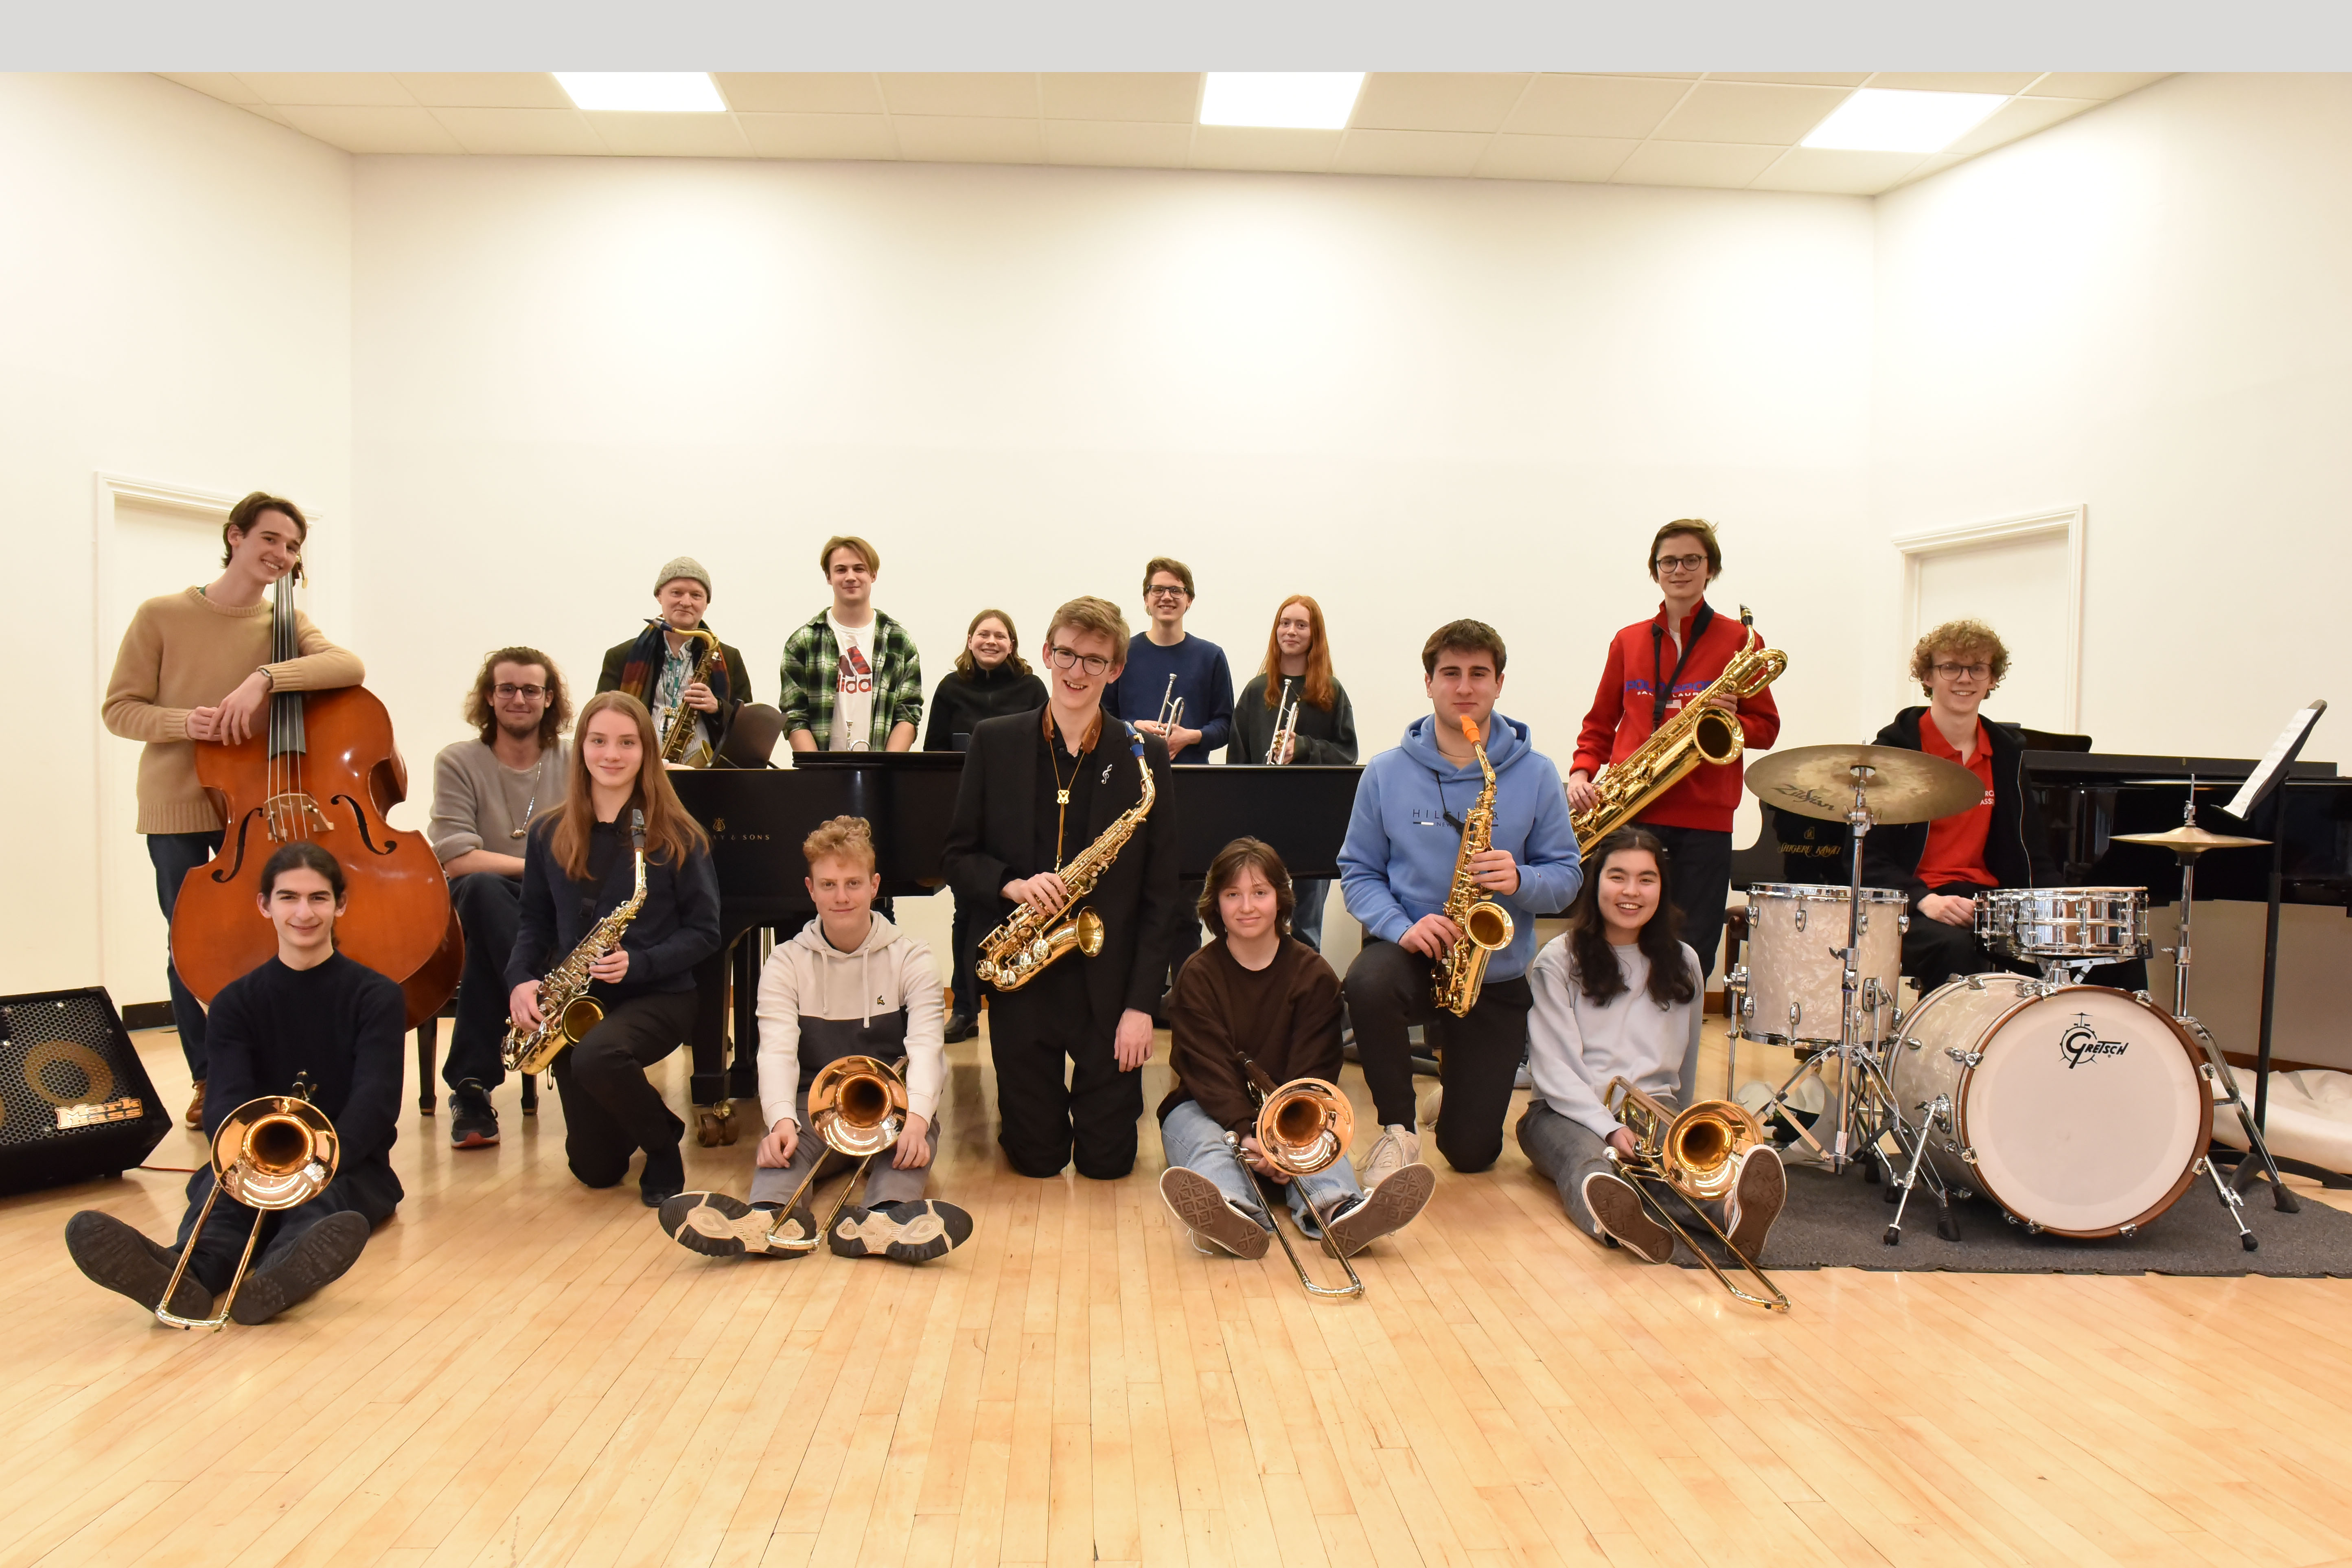 A group photograph of young people holding saxophones, trumpets and other jazz instruments, as well as someone sitting at a drum kit, in a room with bare white walls and a wooden floor